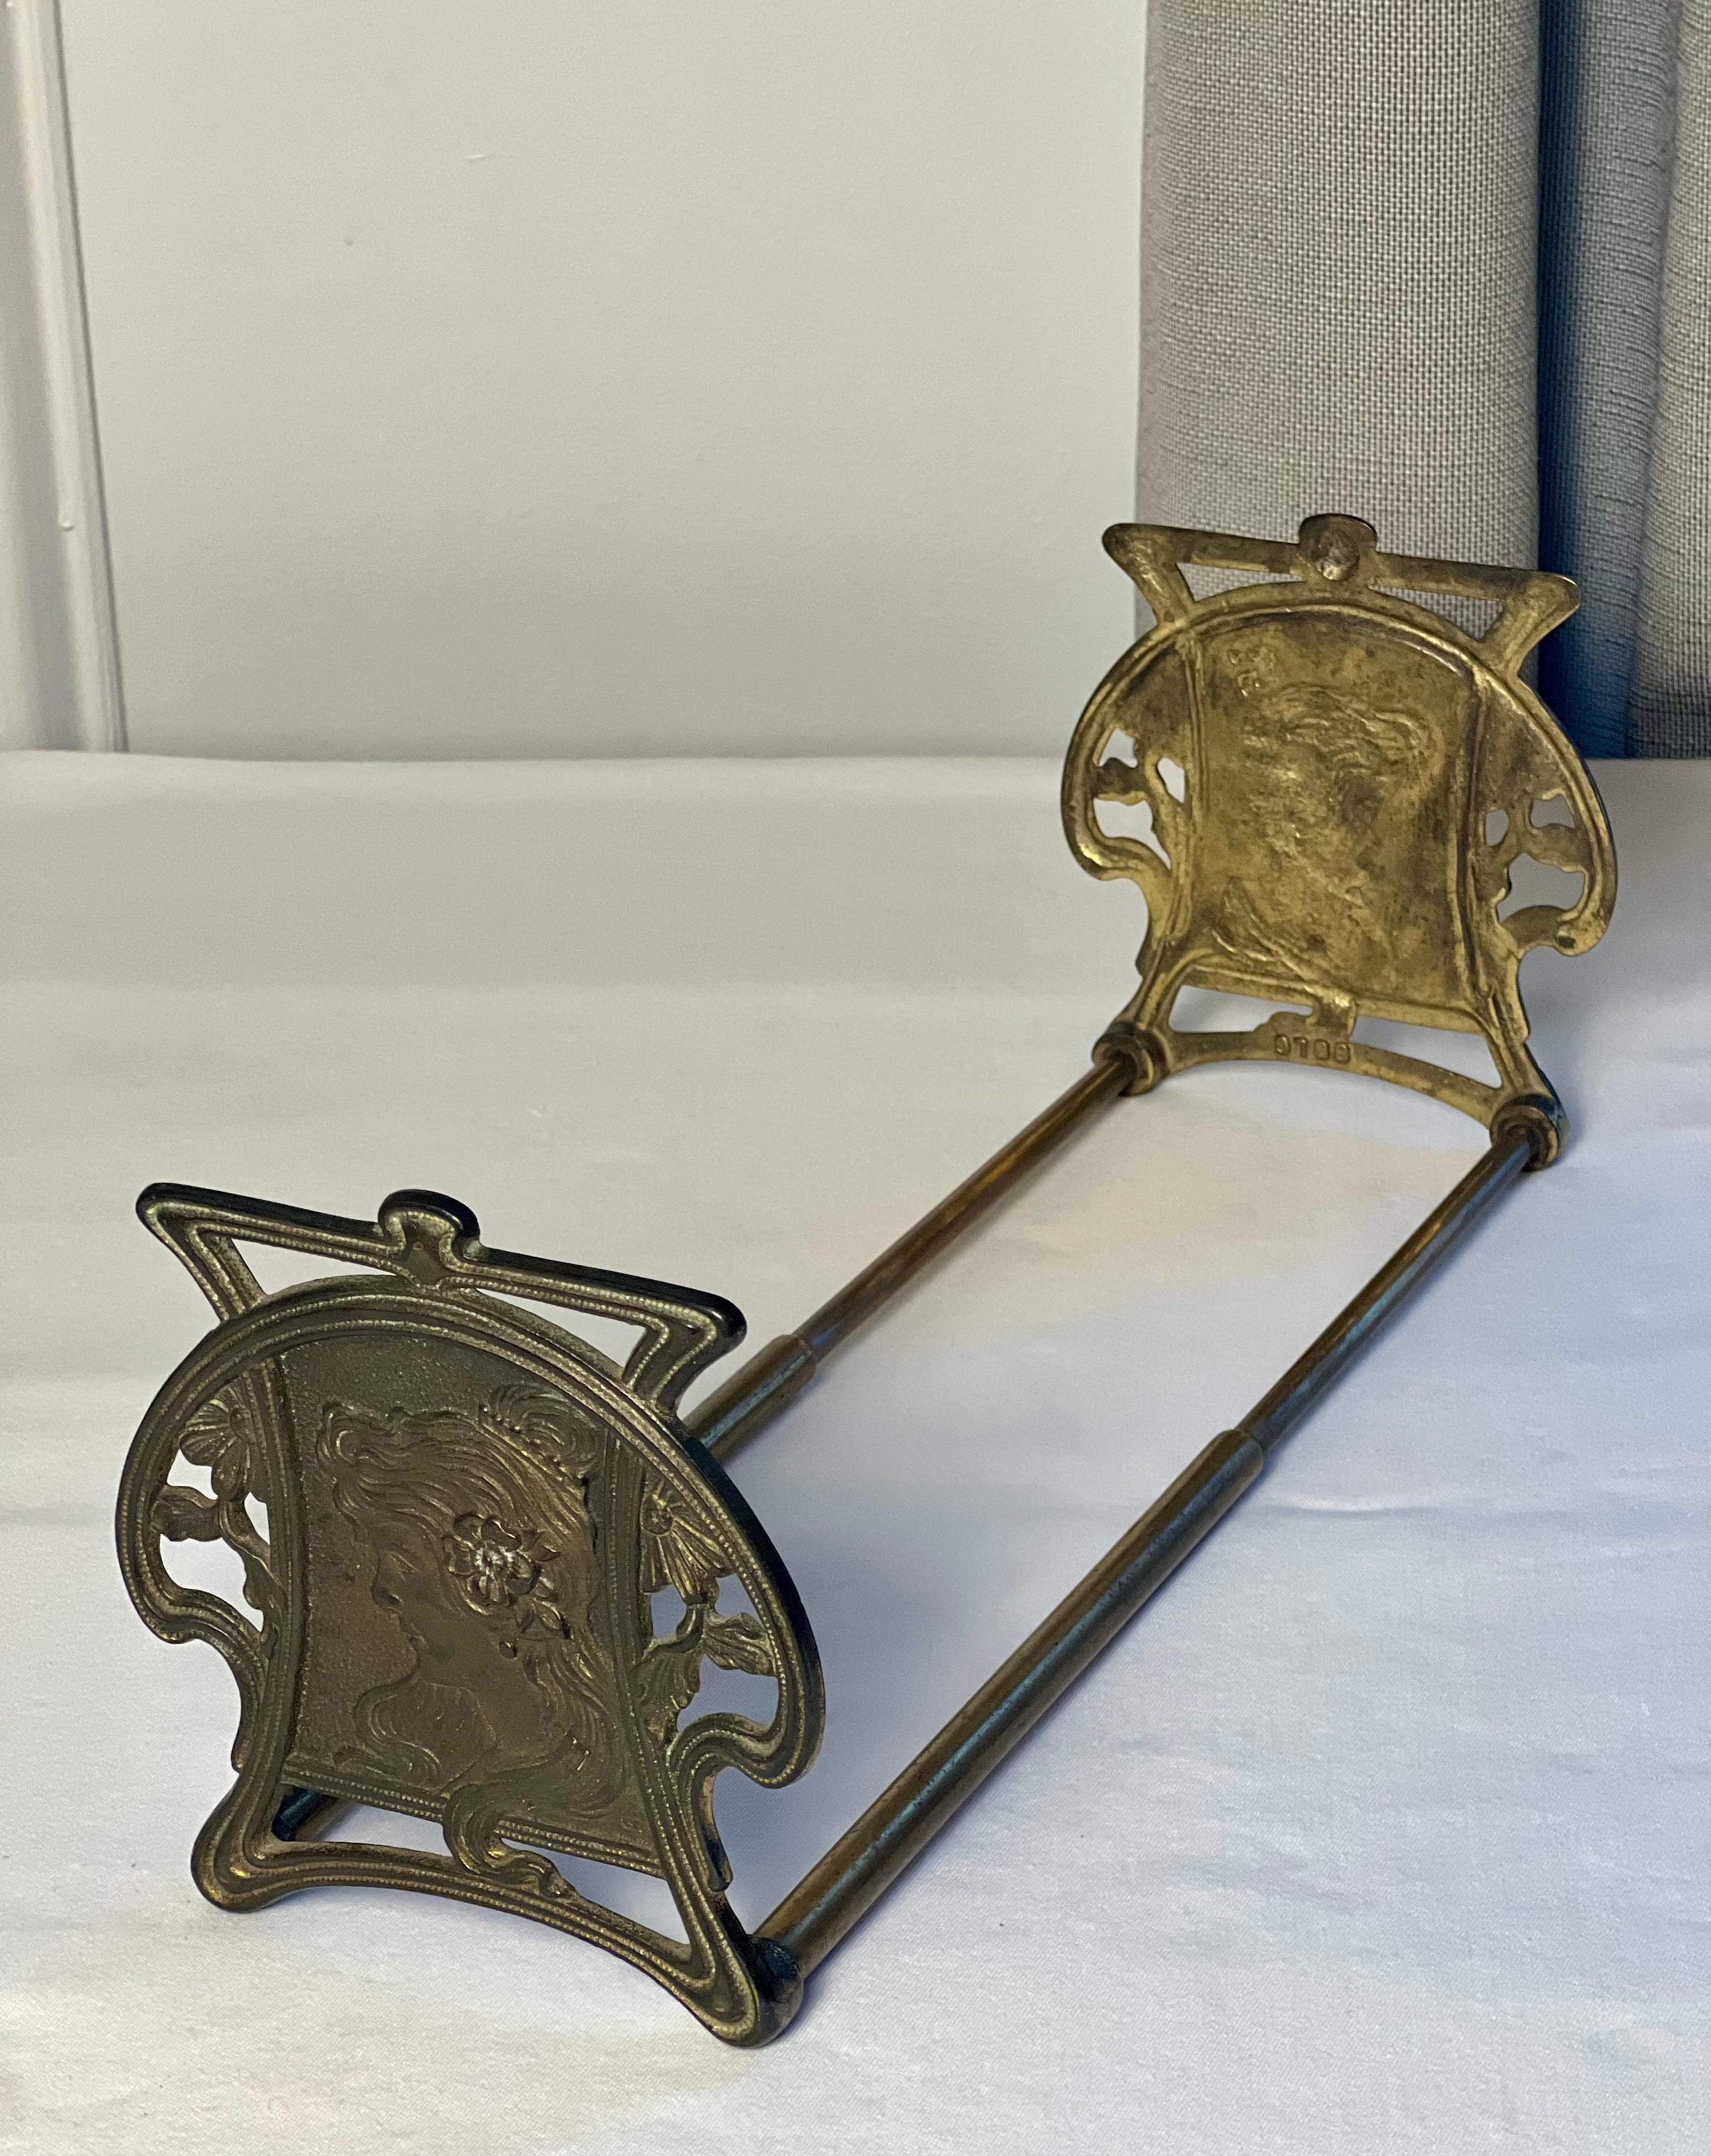 North American Antique Art Nouveau Cast Iron and Brass Adjustable Book Stand by Judd Company For Sale